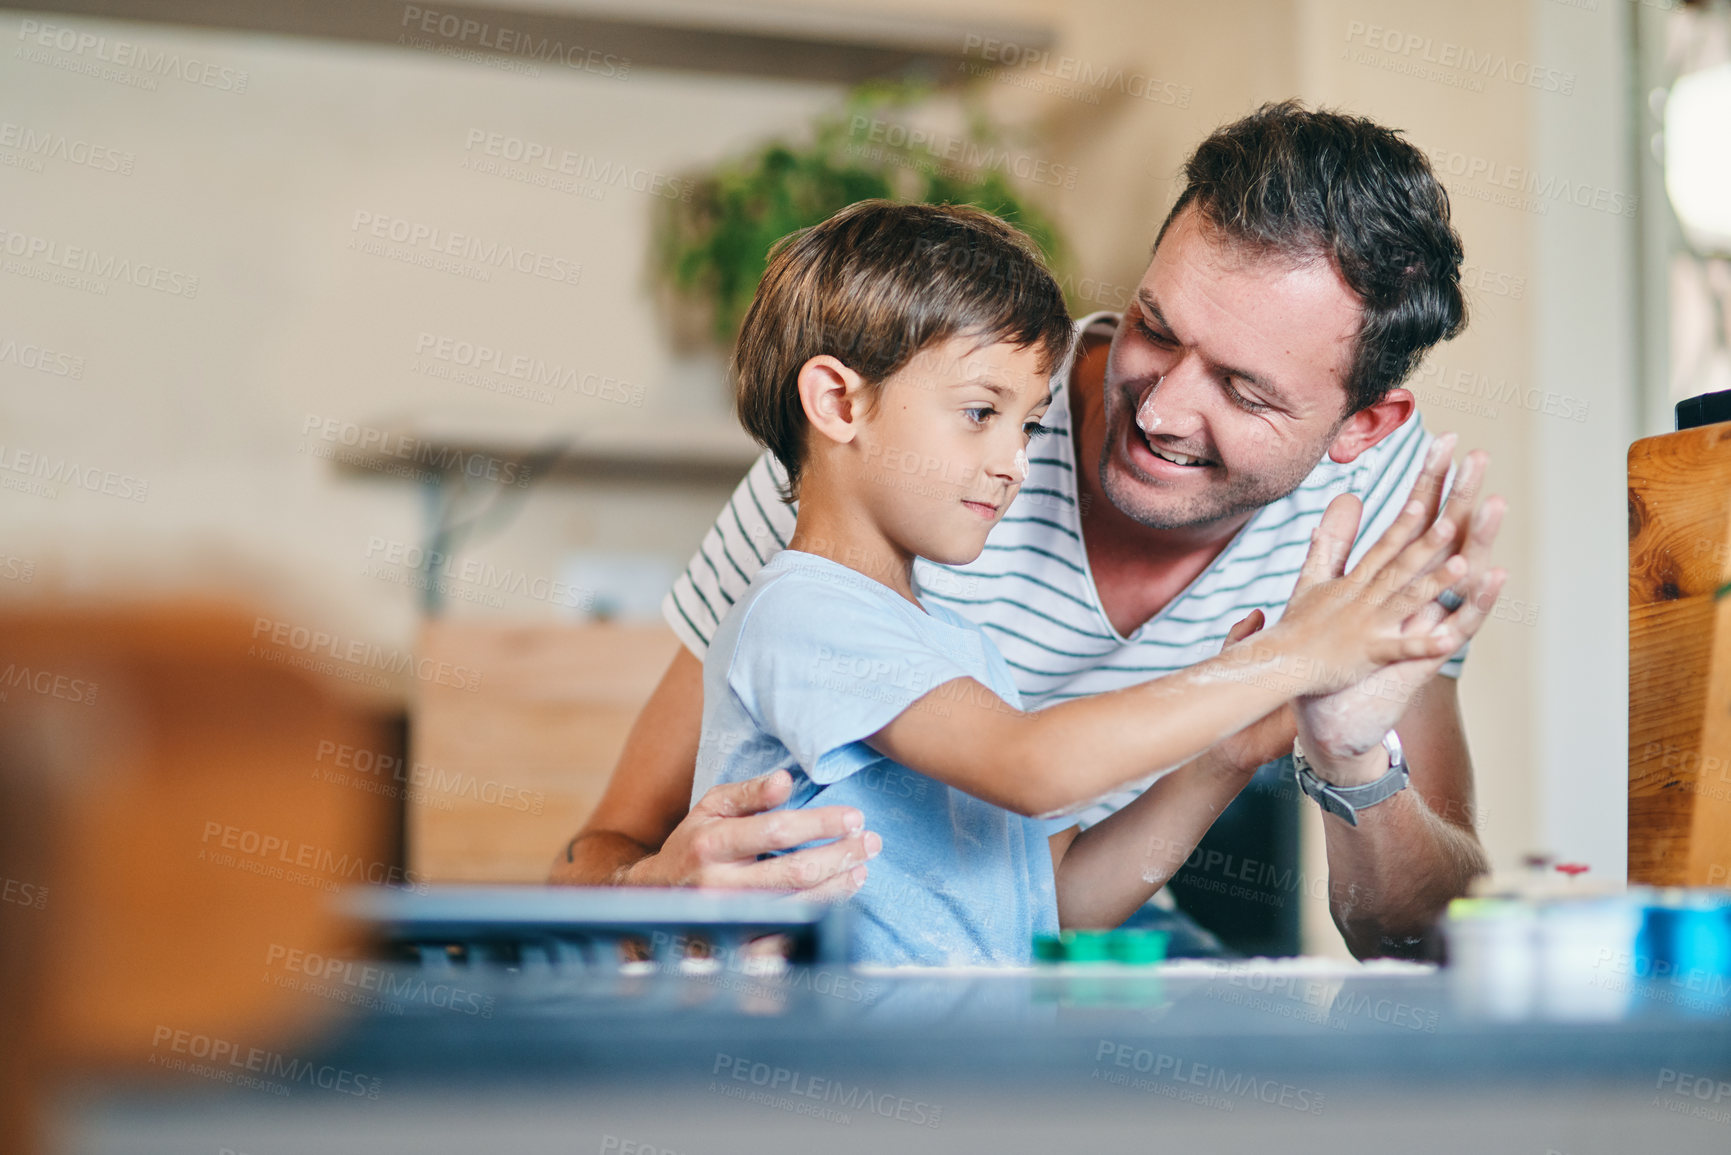 Buy stock photo Shot of an adorable little boy giving his father a high five while baking together at home